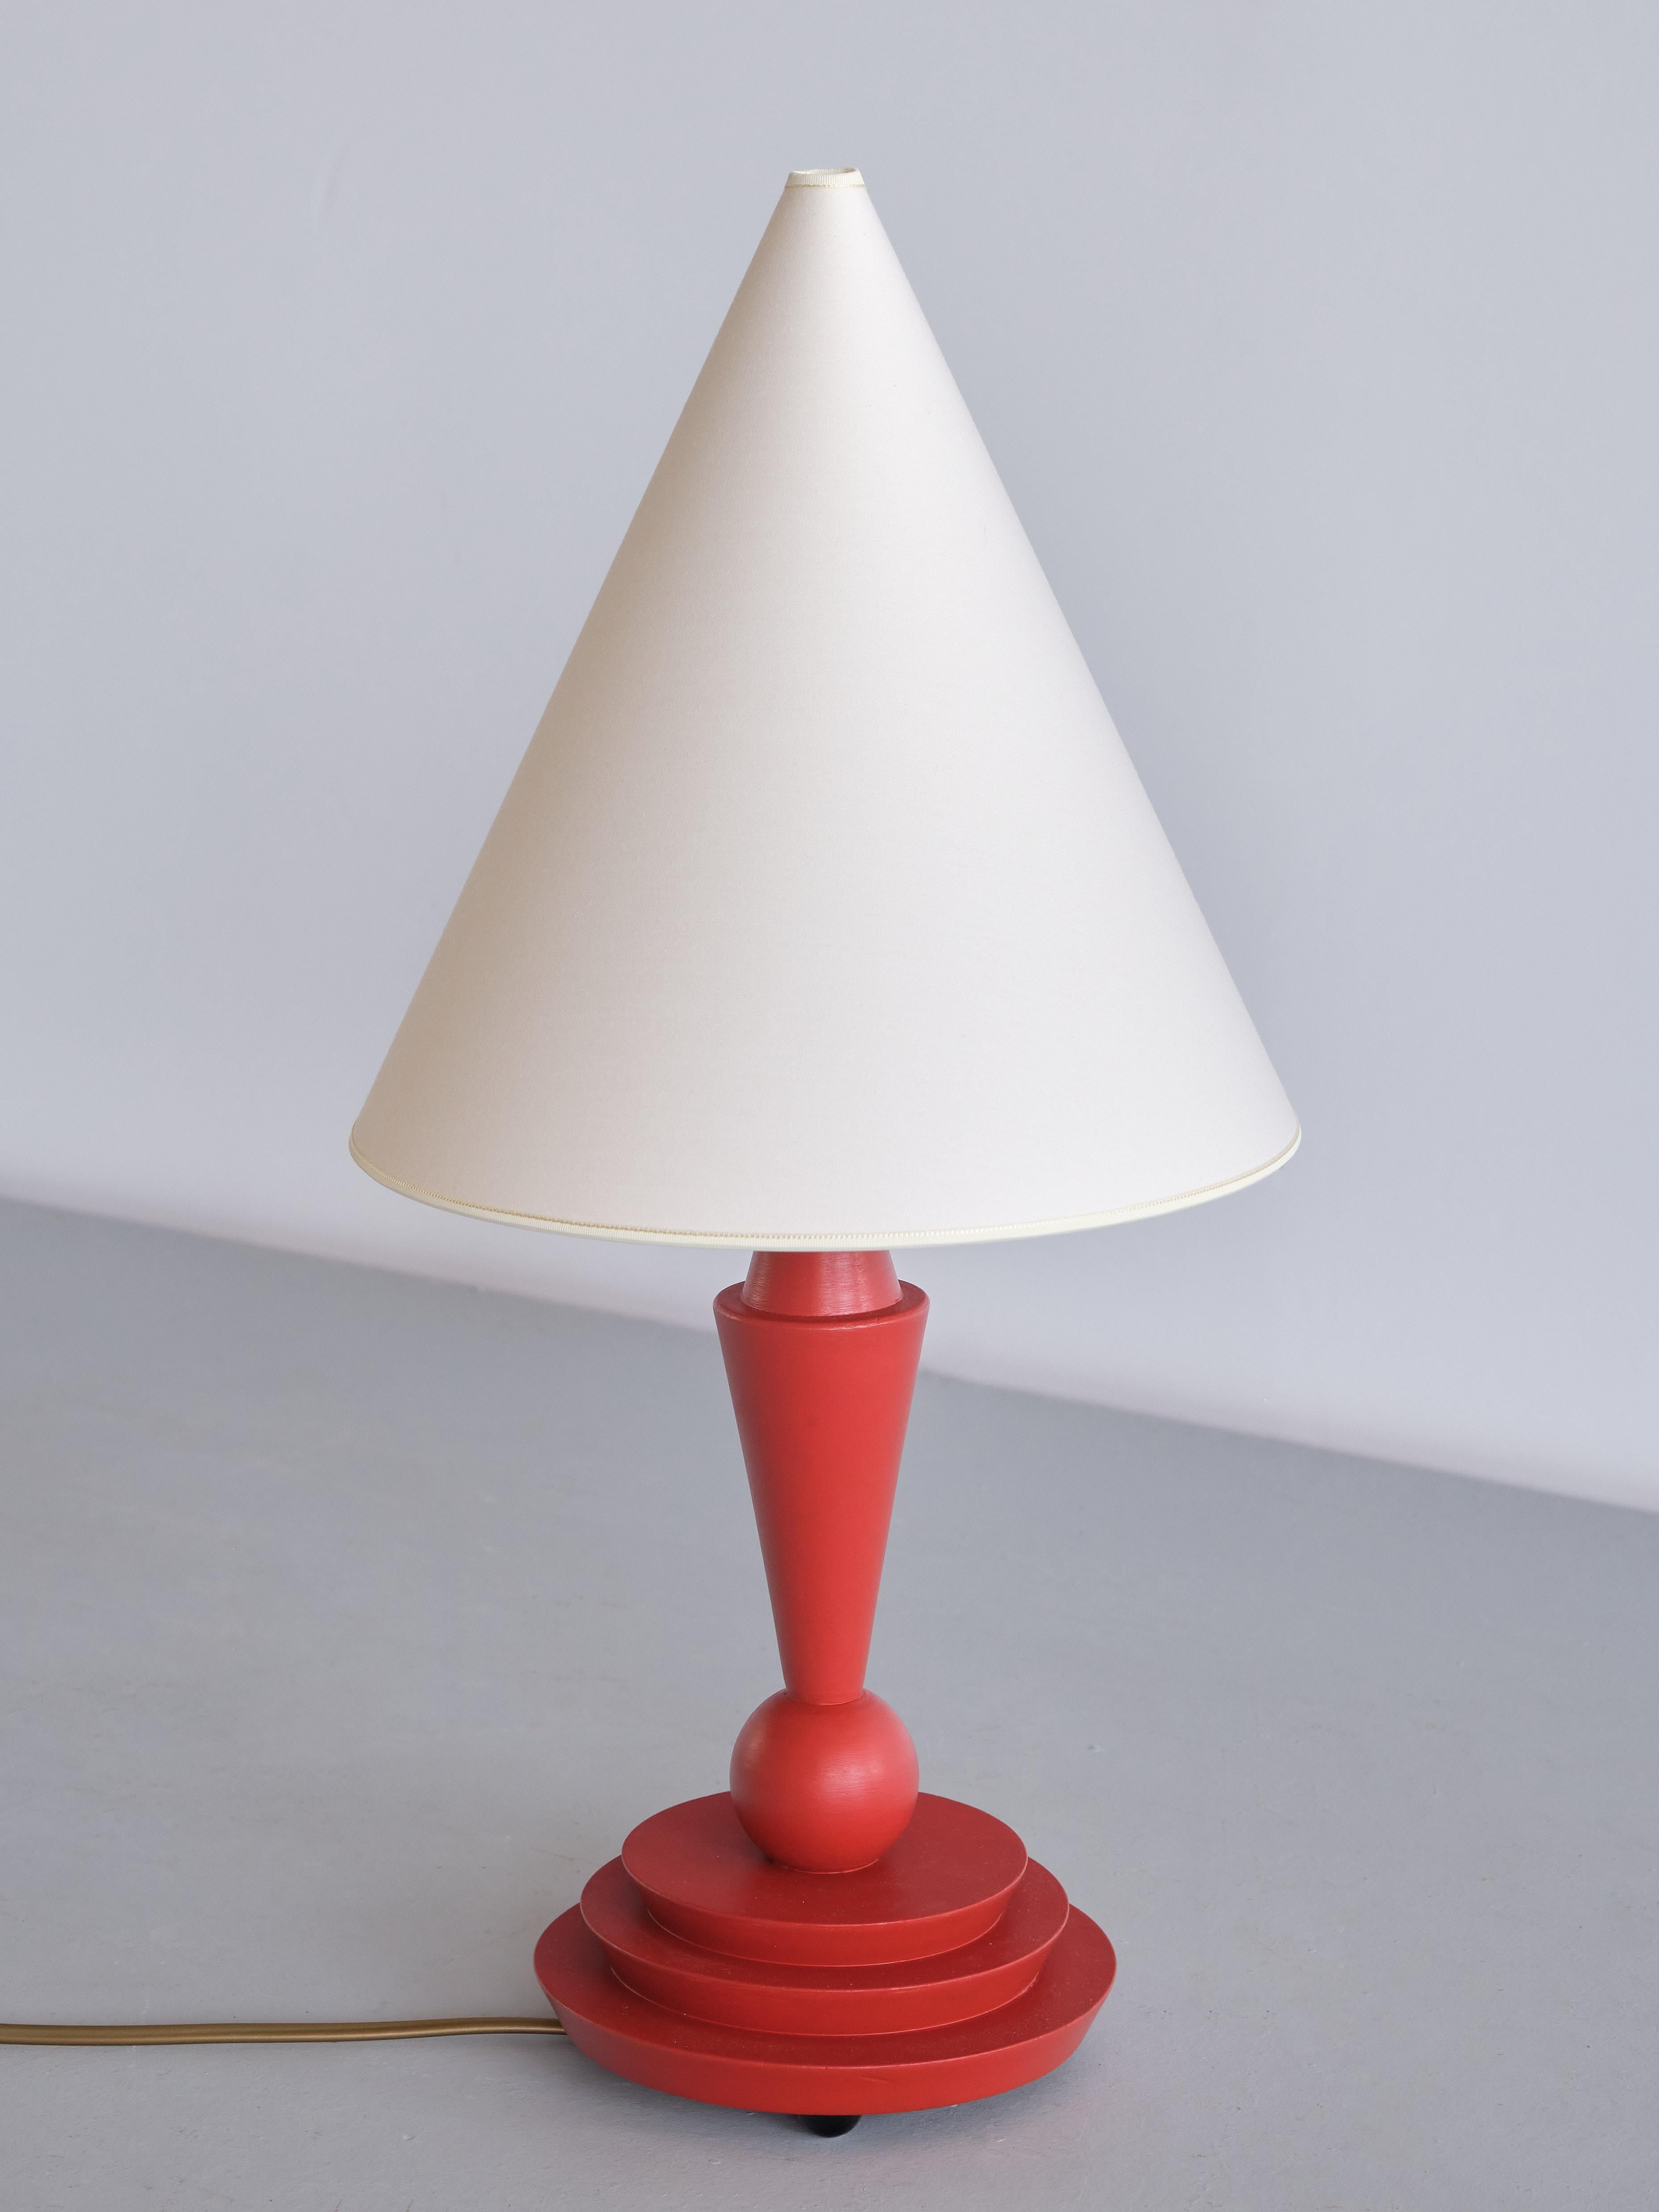 This striking Art Deco table lamp was produced in Austria in the late 1930s. The design is marked by the elegant shape of the beech base which has been finished in a vermilion (red/orange) lacquer. The lamp consists of a three tiered circular base,